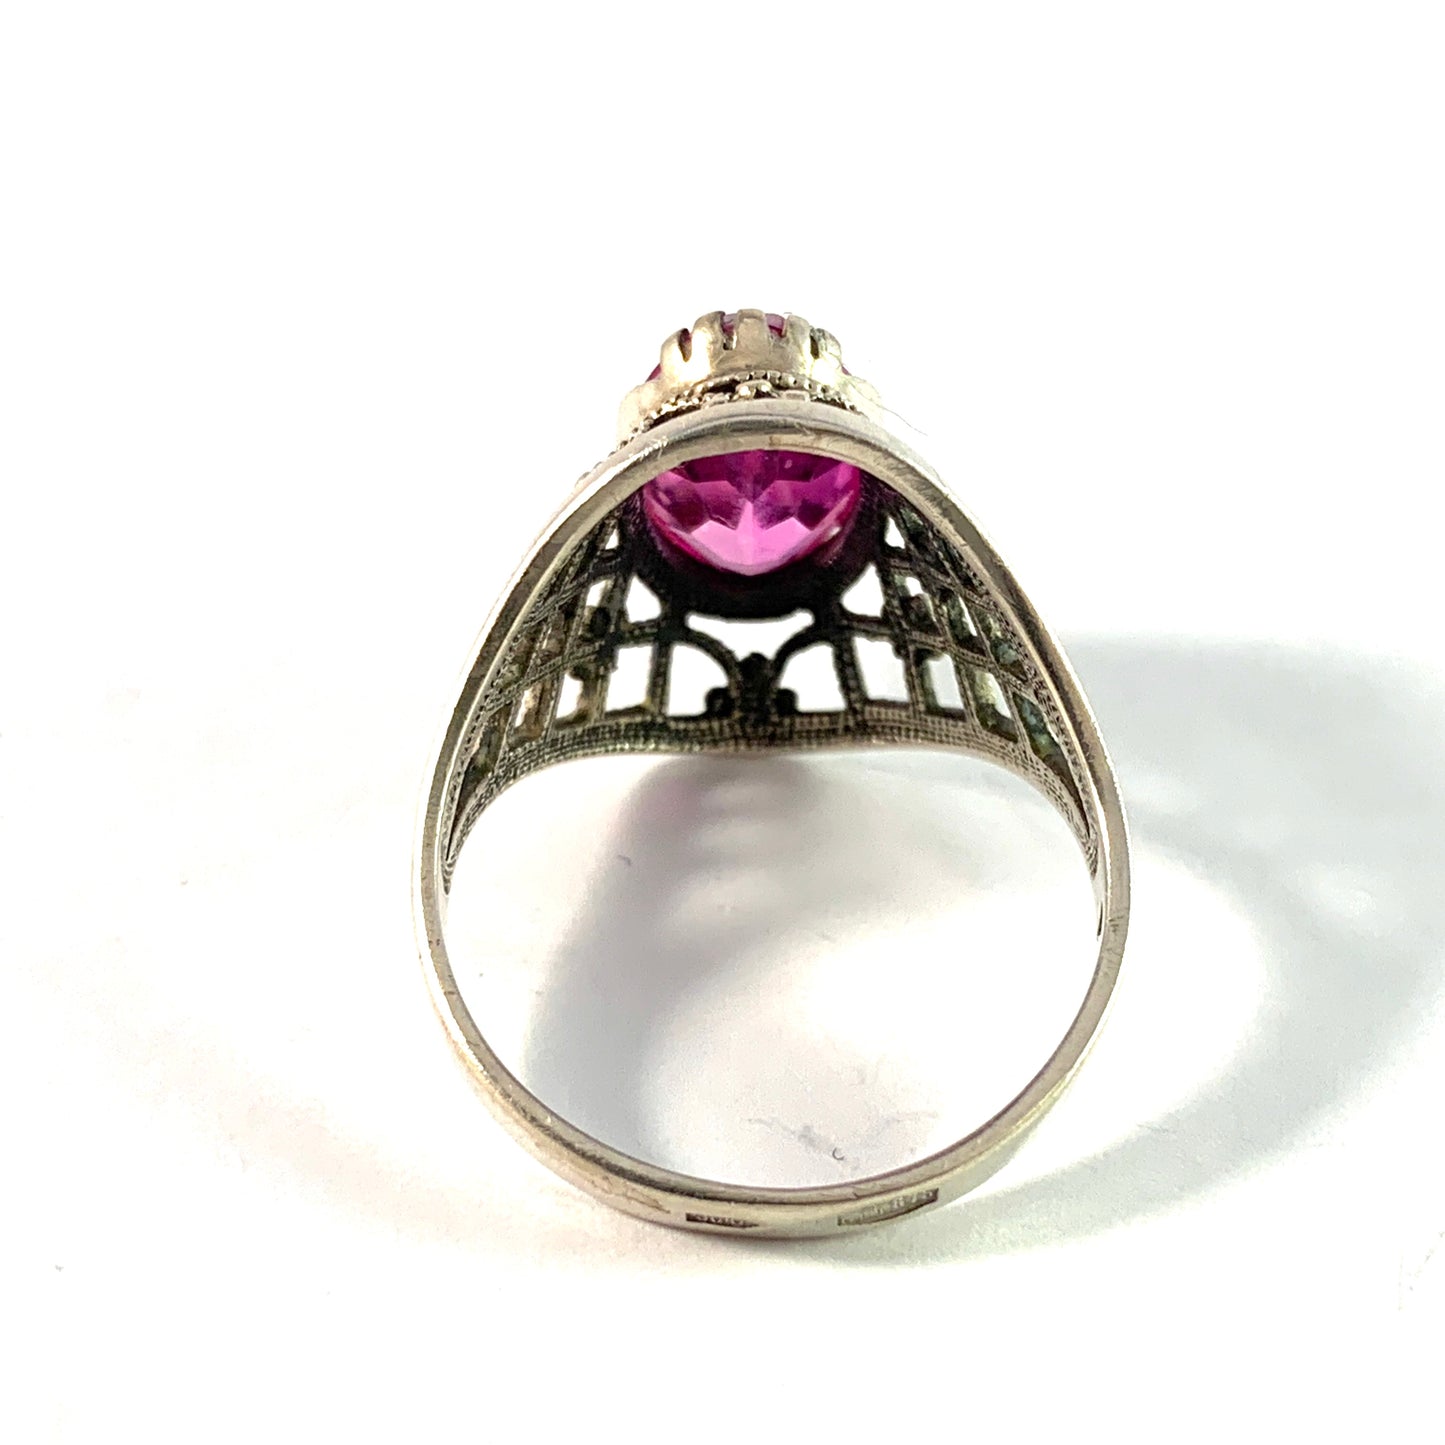 Russia, Soviet Era 1960-70s. Solid 875 Silver Synthetic Pink Sapphire Ring.